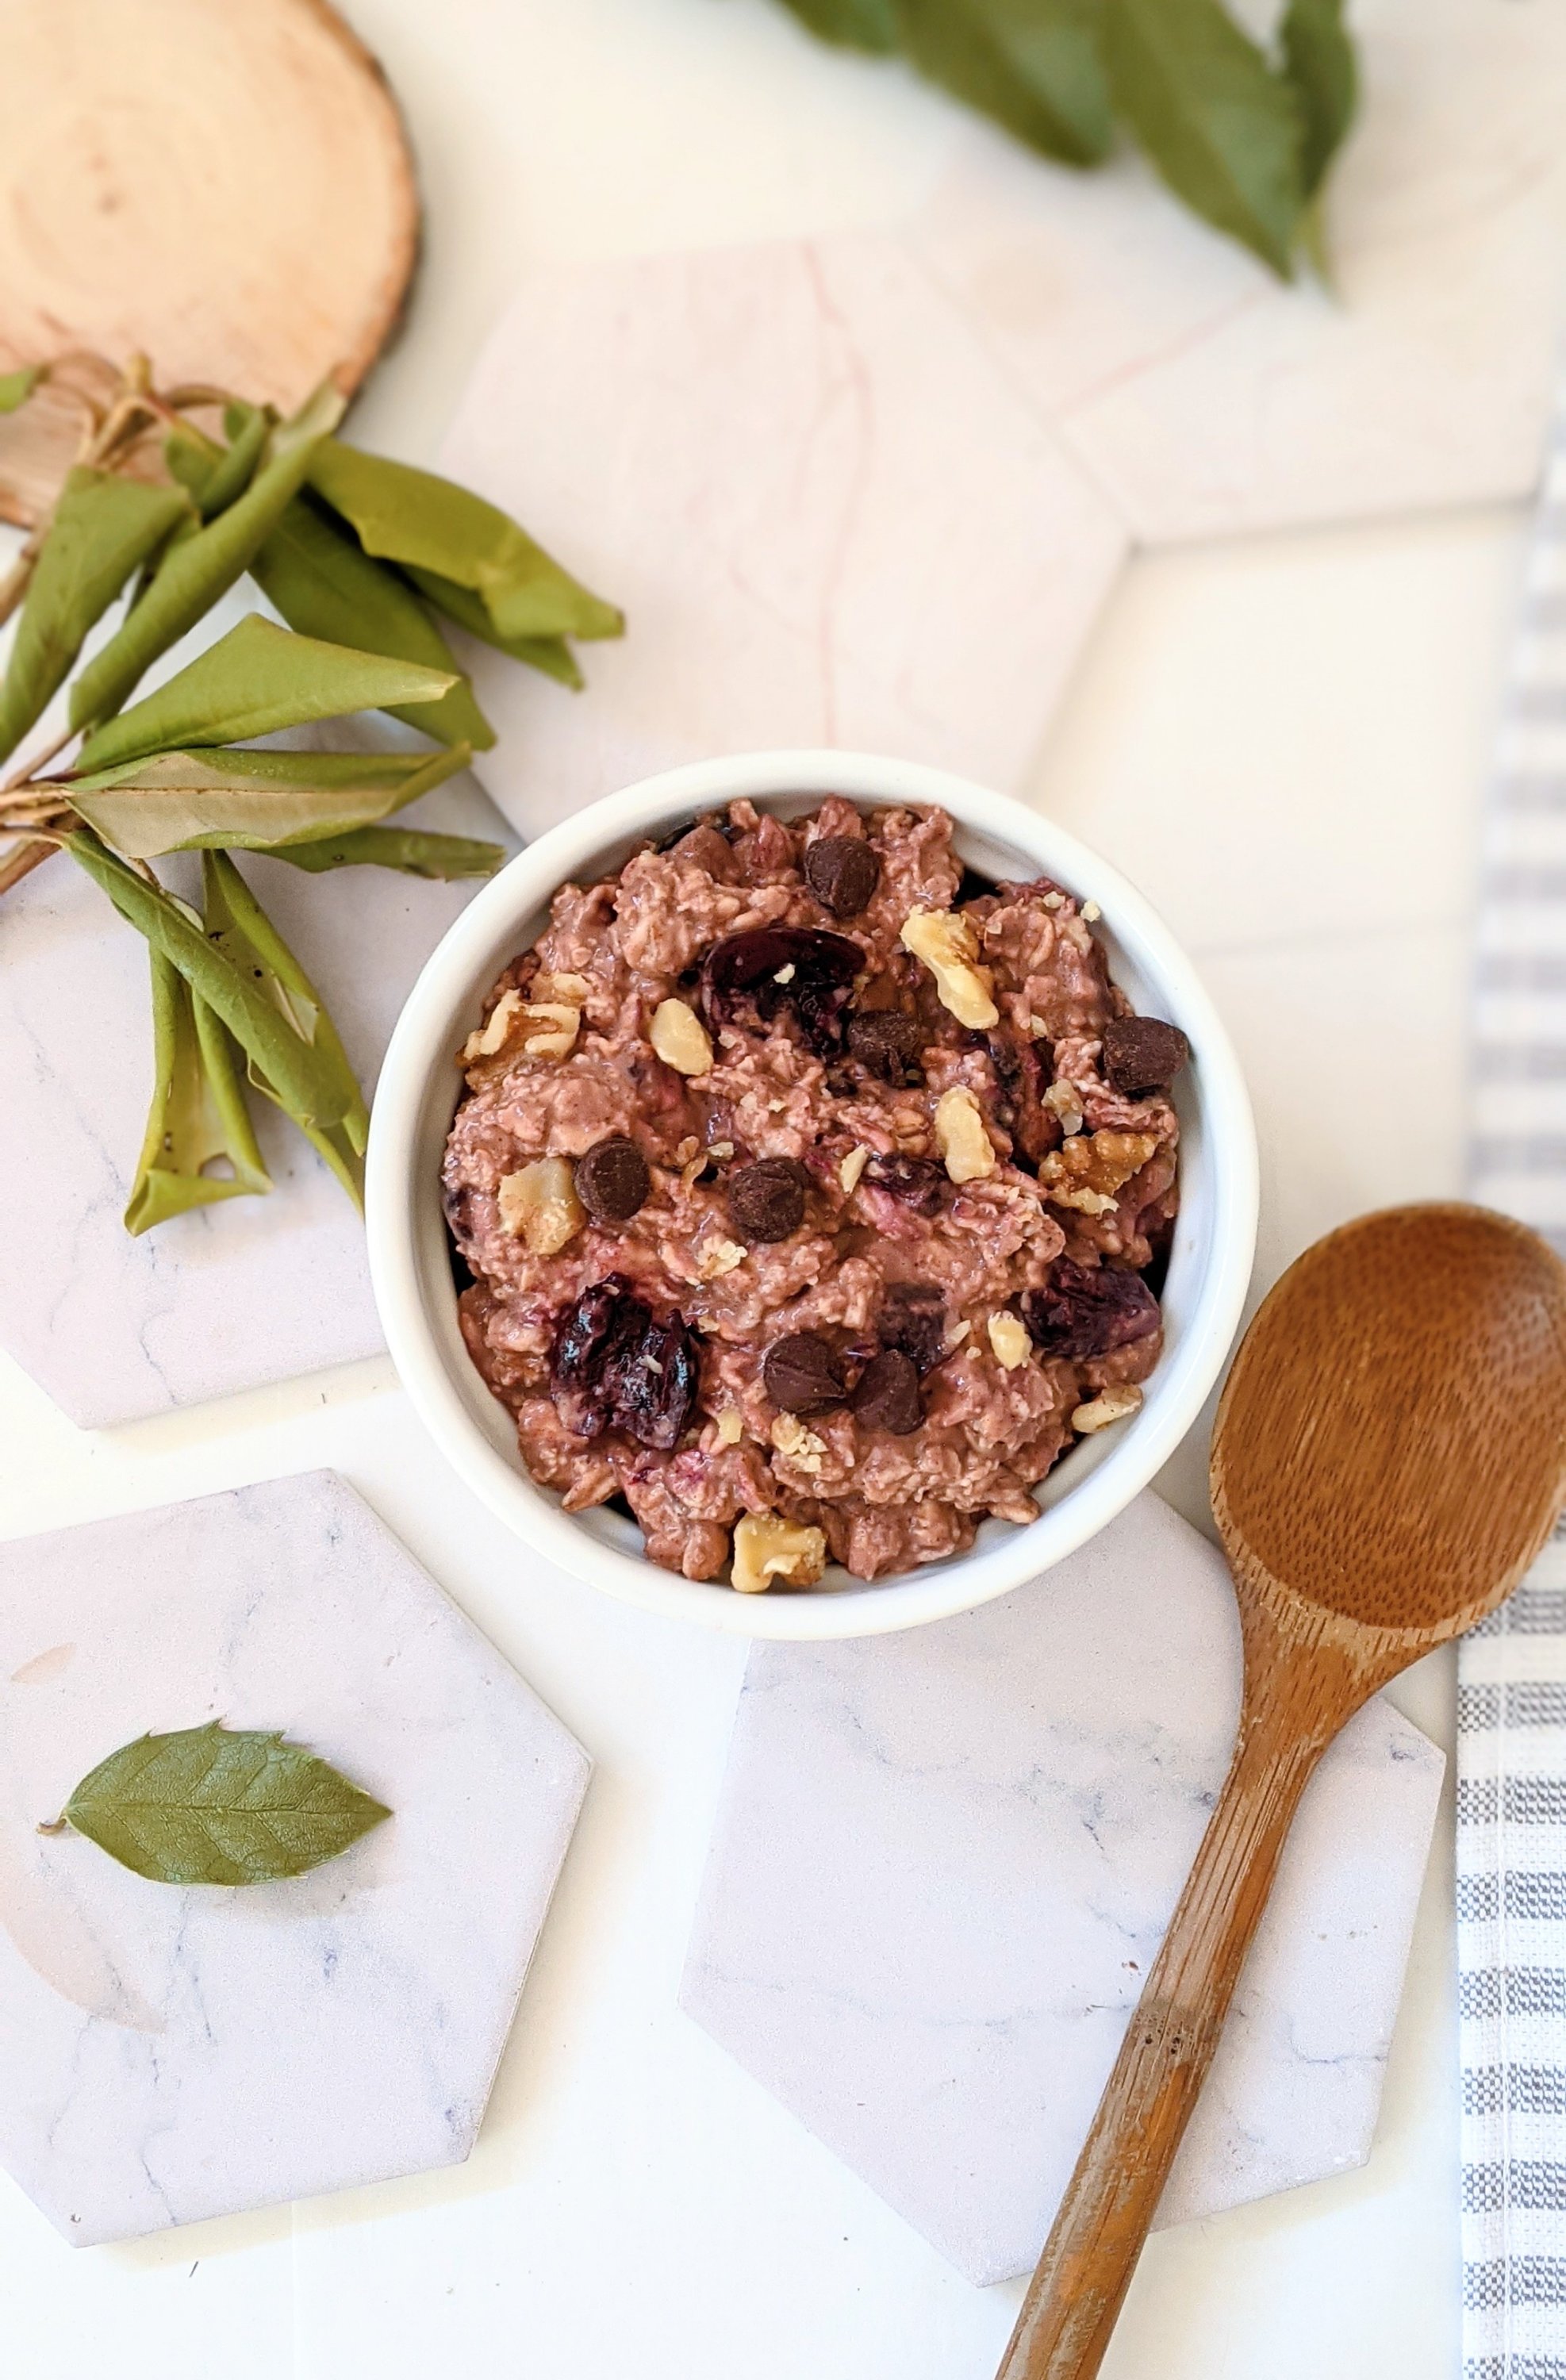 vegan high fiber breakfast recipes with cherries and chocolate brunch ideas fancy oatmeal recipes no cook summer breakfasts for kids on the go recipes for breakfast for school grab and go breakfasts